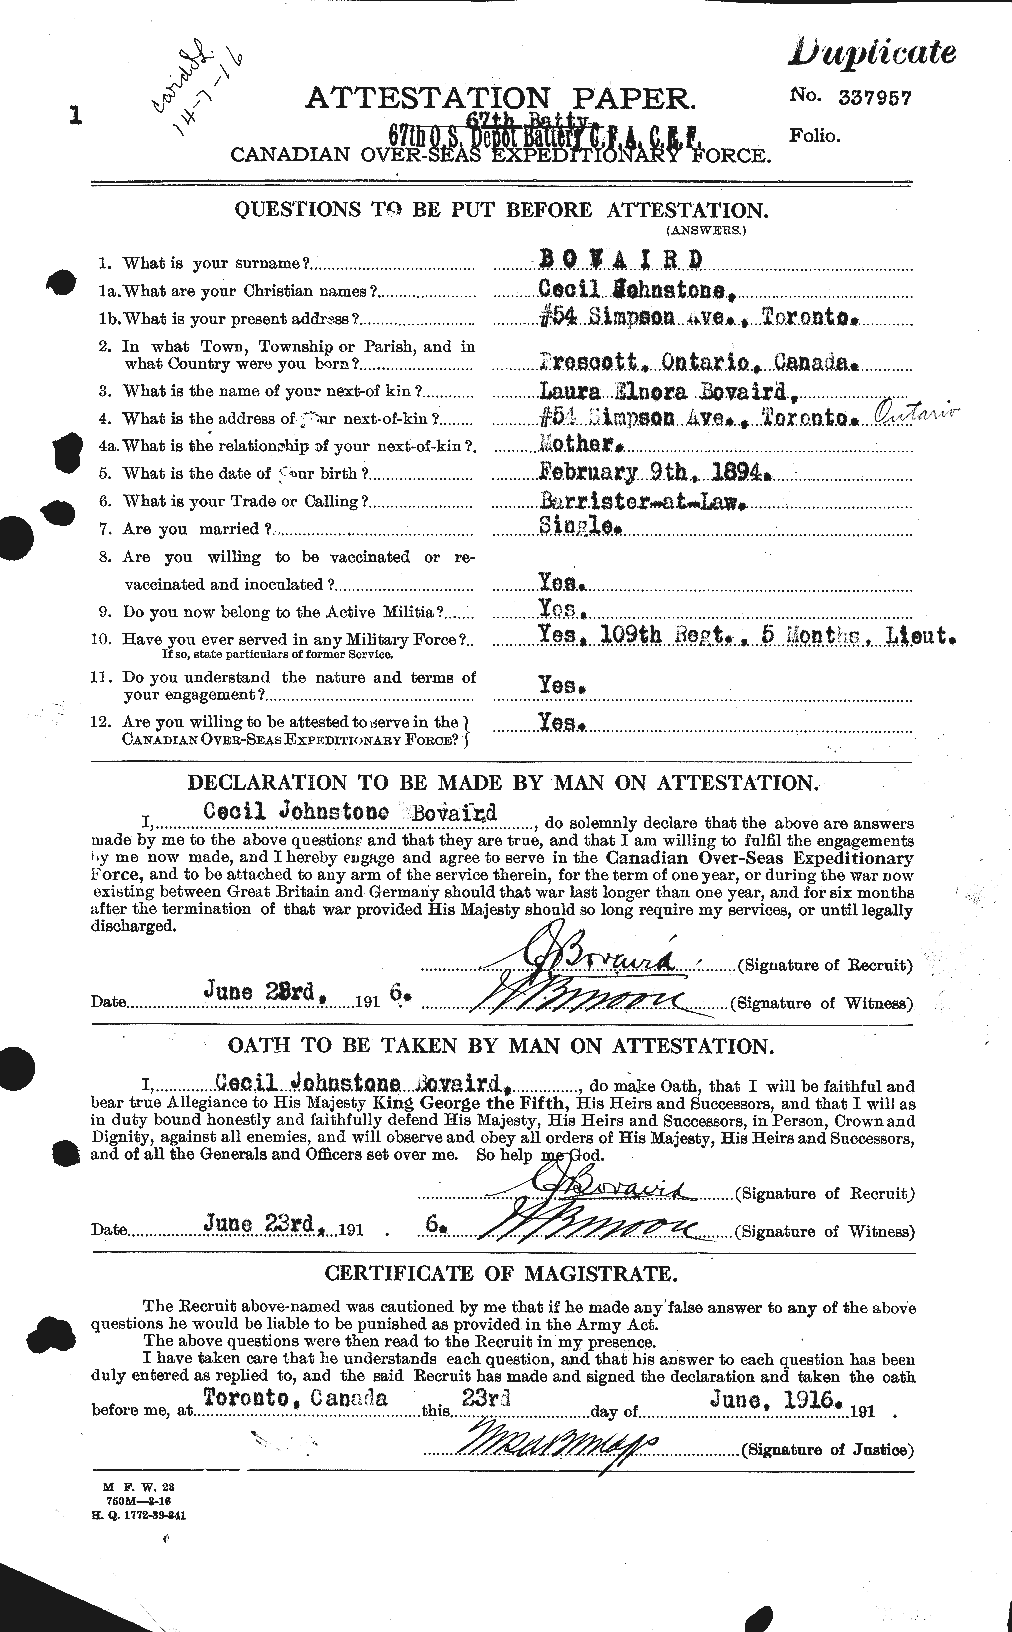 Personnel Records of the First World War - CEF 254394a